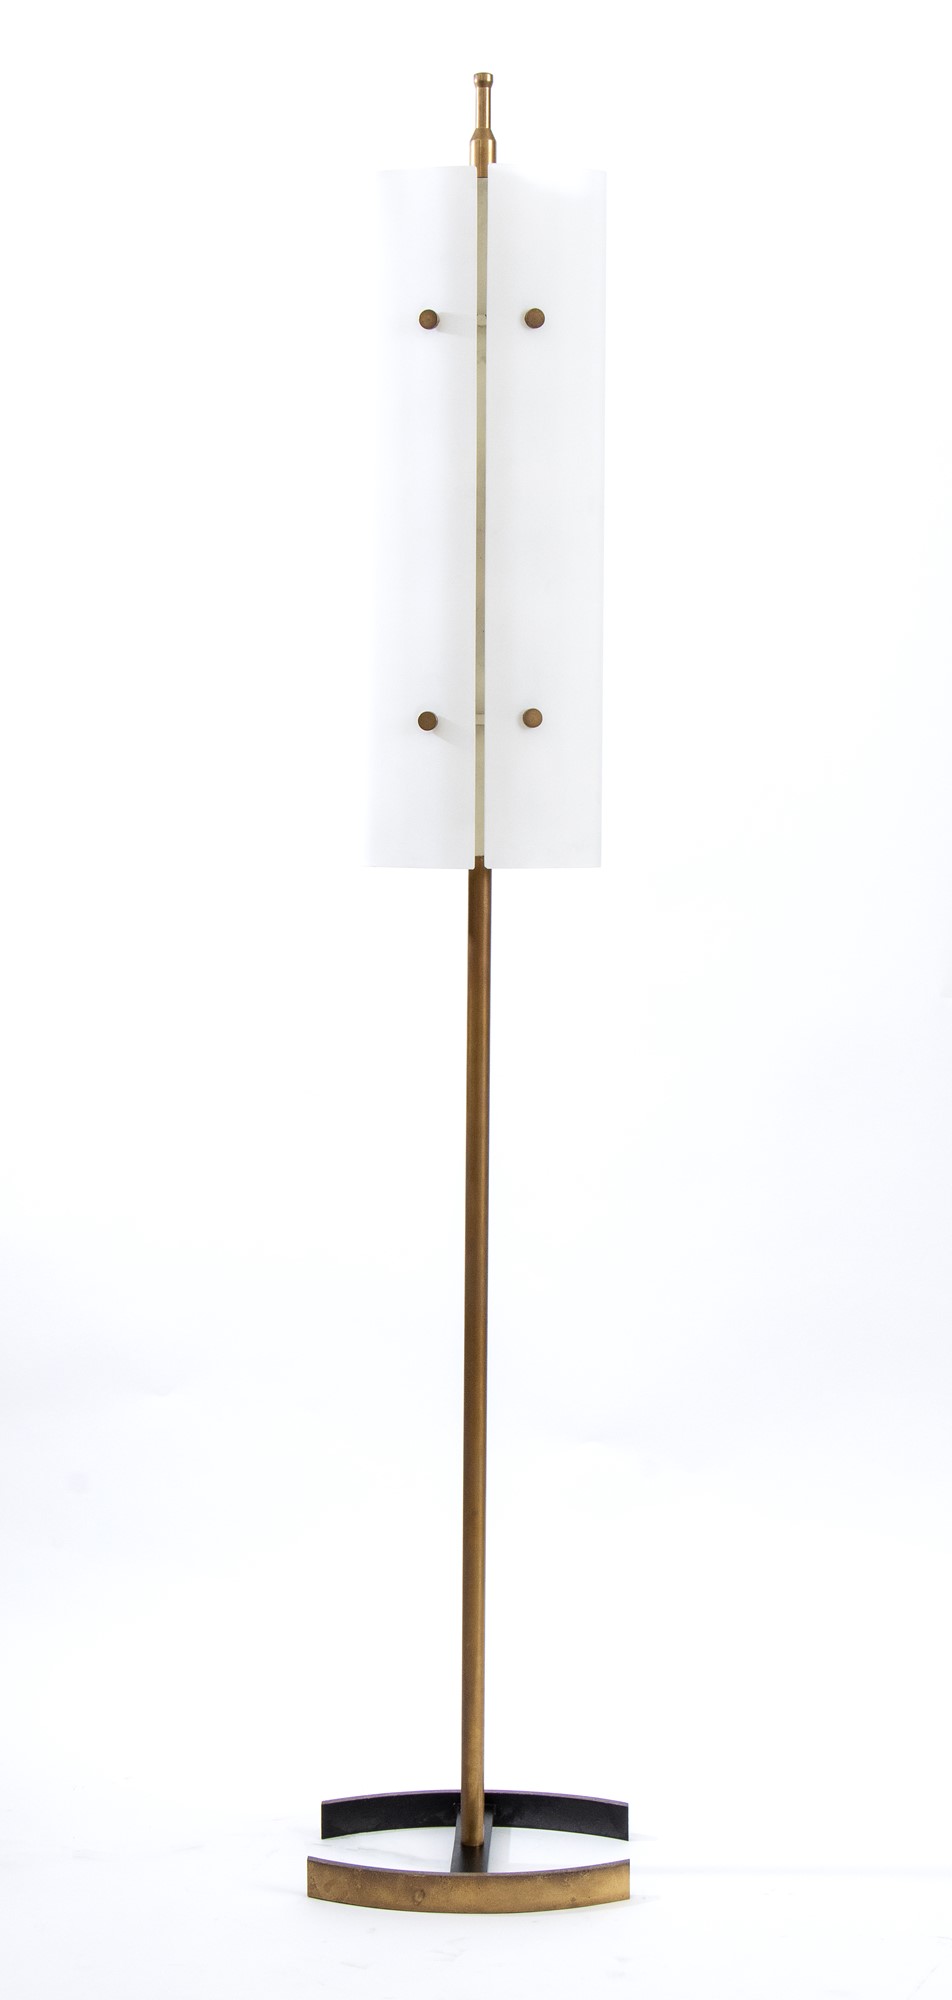 Angelo Lelli Ancona 1915-Monza 1979 Floor lamp mod. 12707 in brass and opal glass diffusers - Image 3 of 15